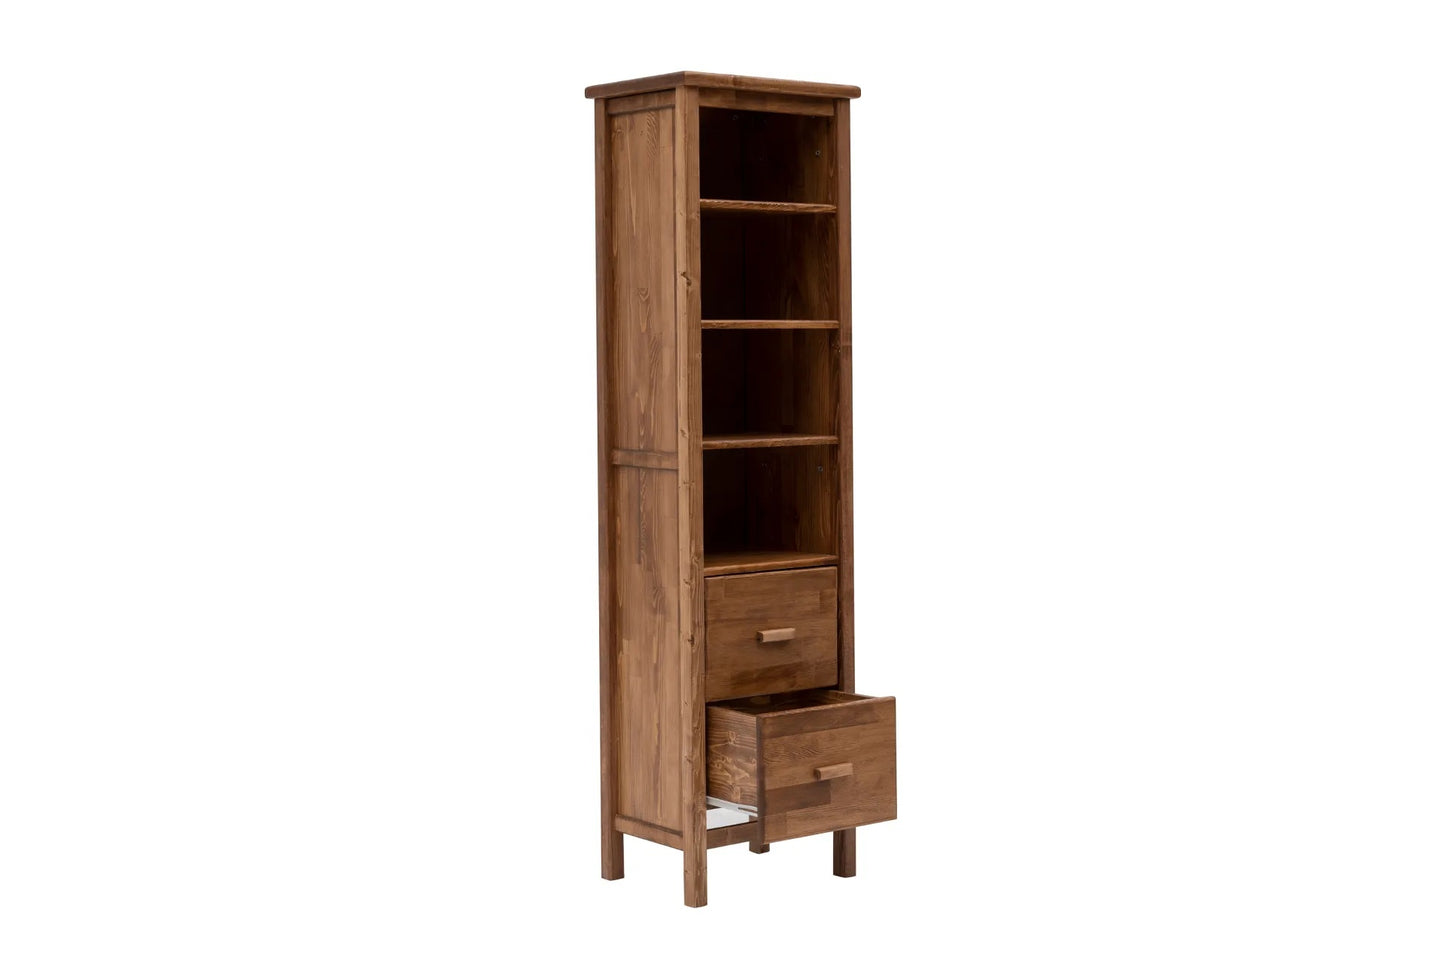 Solid Pine Wood Handmade Bookcase Bookshelf Shelving Unit with Drawers an Open Storage Shelves Dawn